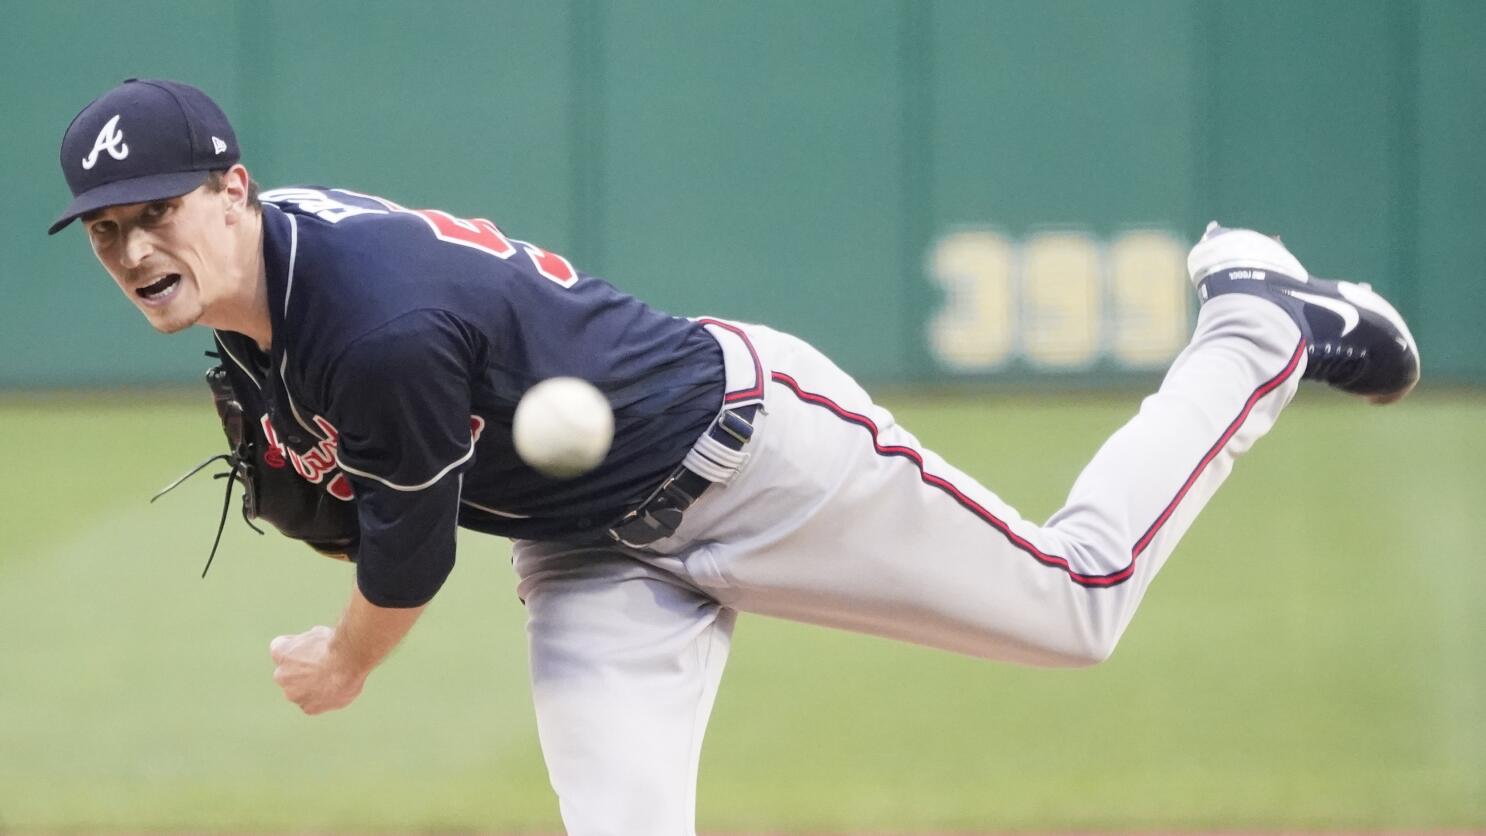 The Atlanta Braves need to lock up Max Fried longterm